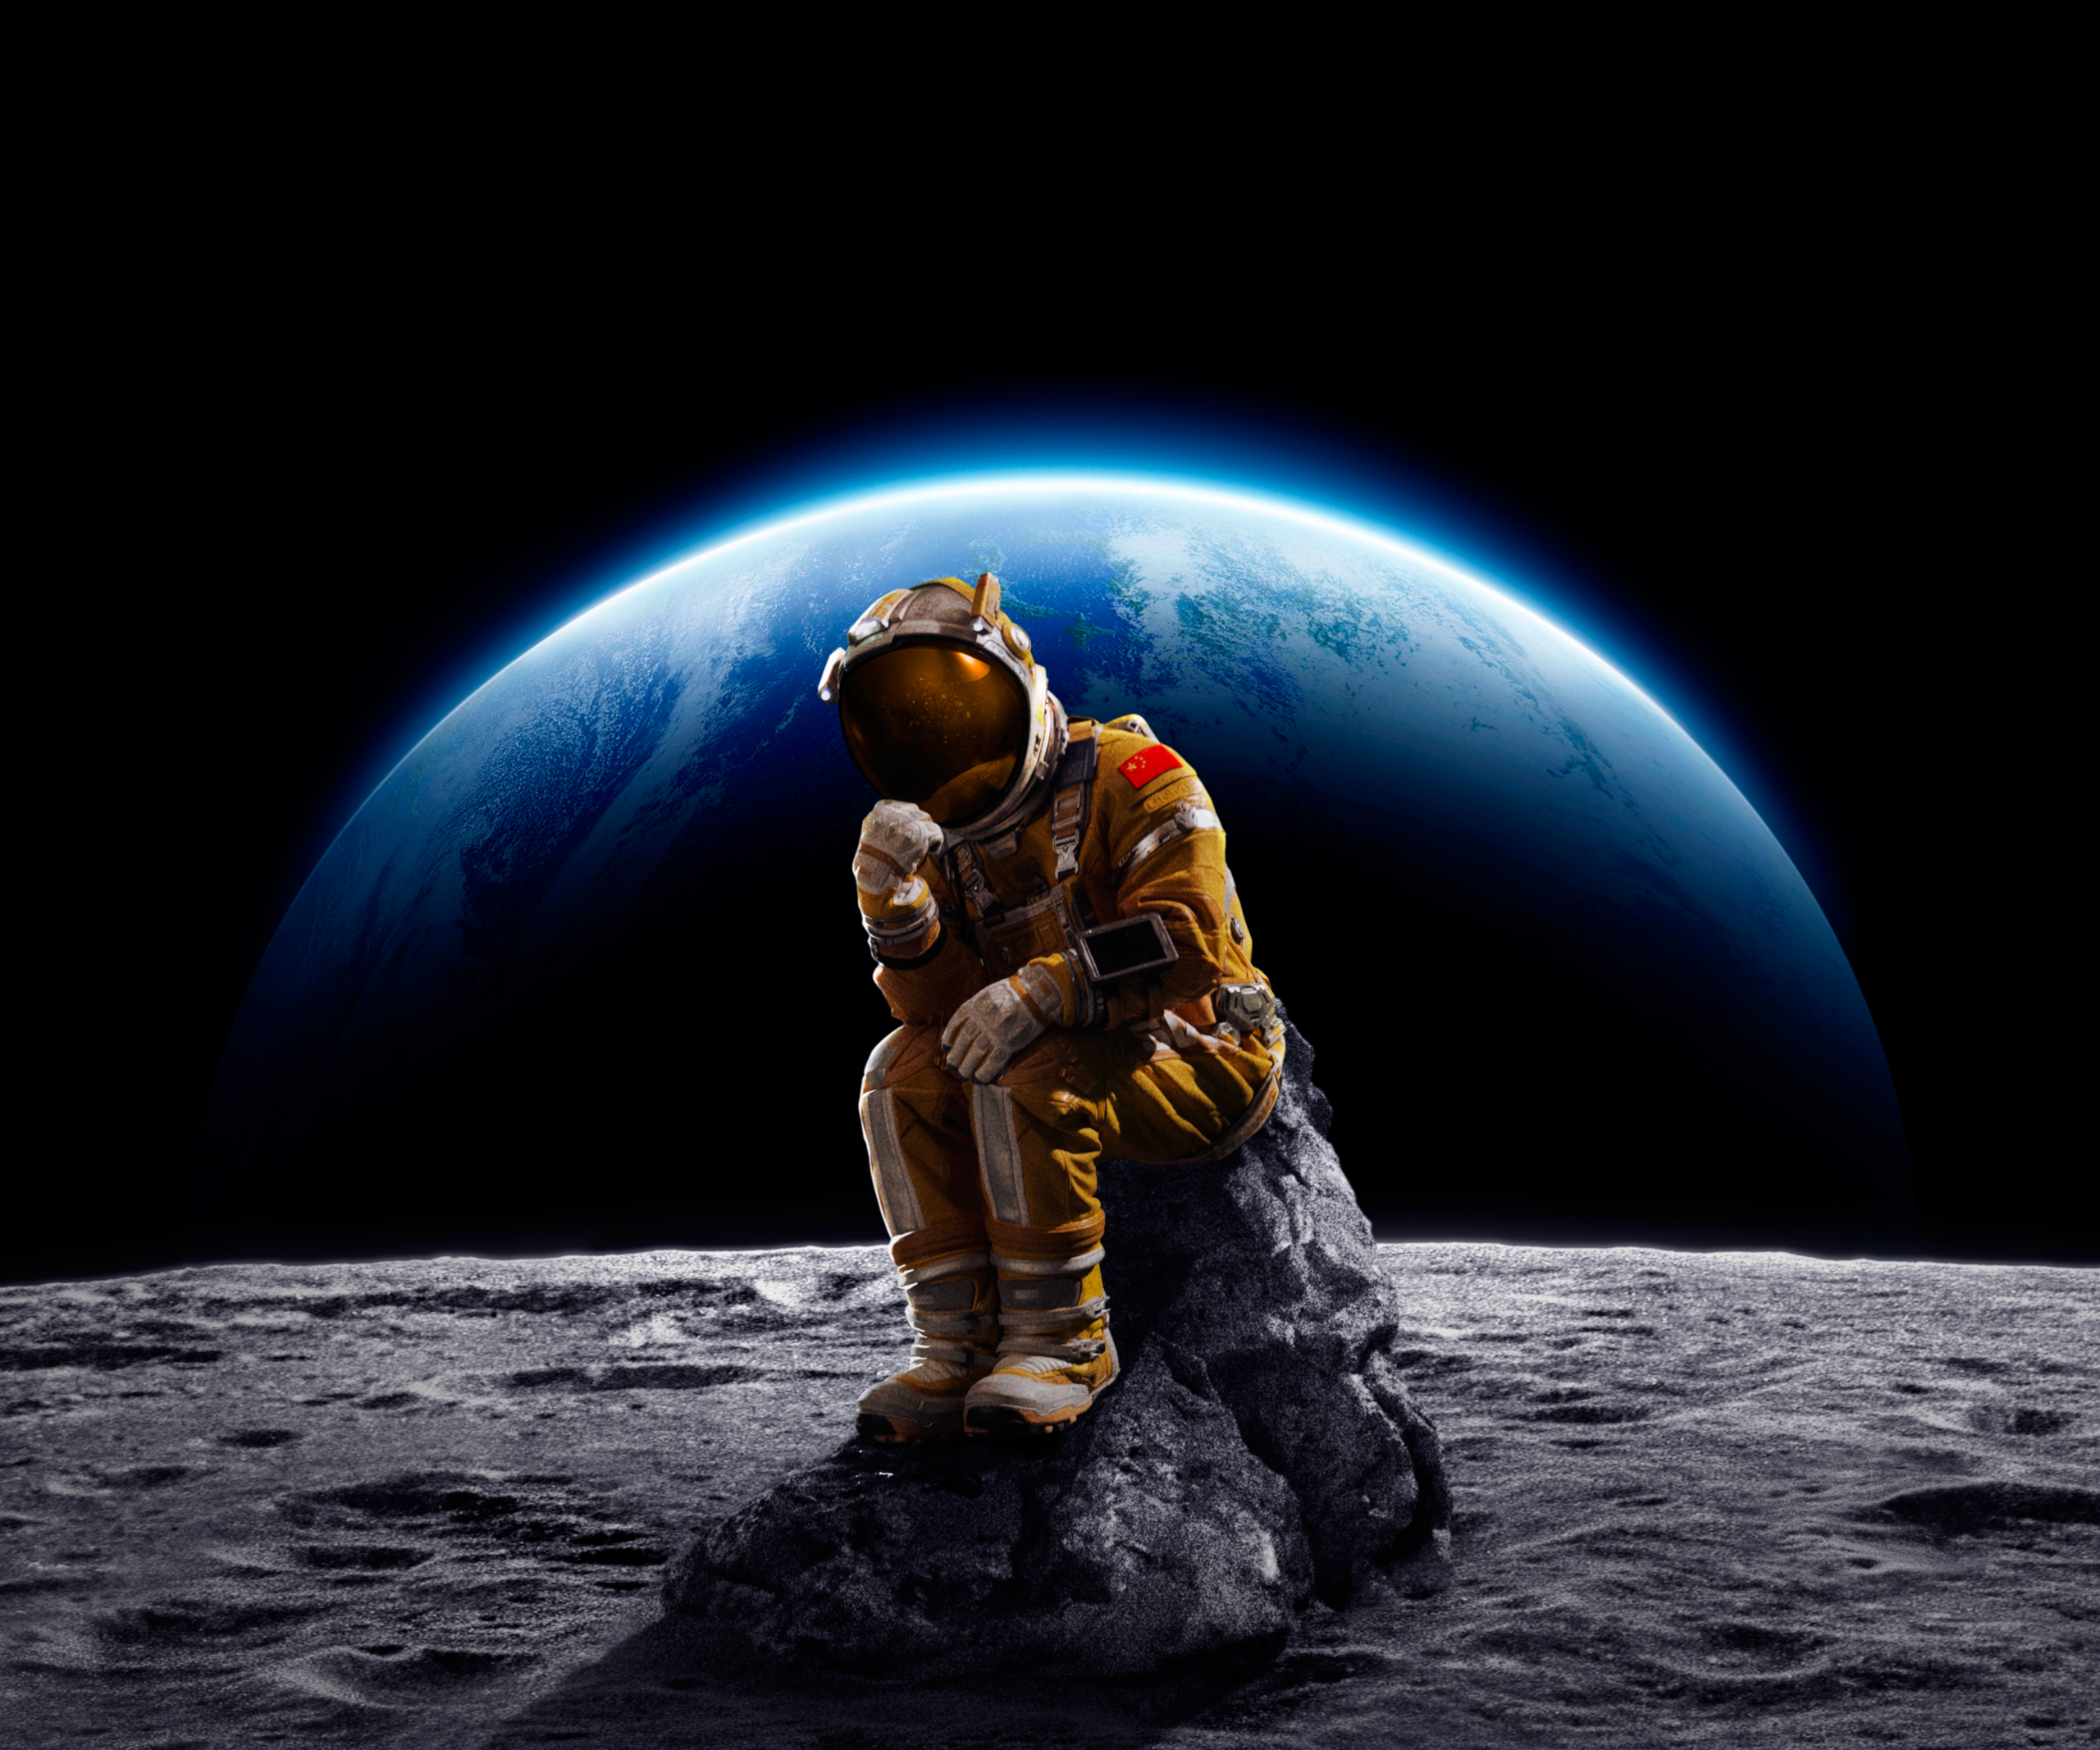 Man On The Moon 3 Wallpaper Discover more Astronaut Man On The Moon 3 Moon  Nice Pattern wallpaper Abstract art wallpaper Cool wallpapers art Art wallpaper  Wallpaper Download  MOONAZ